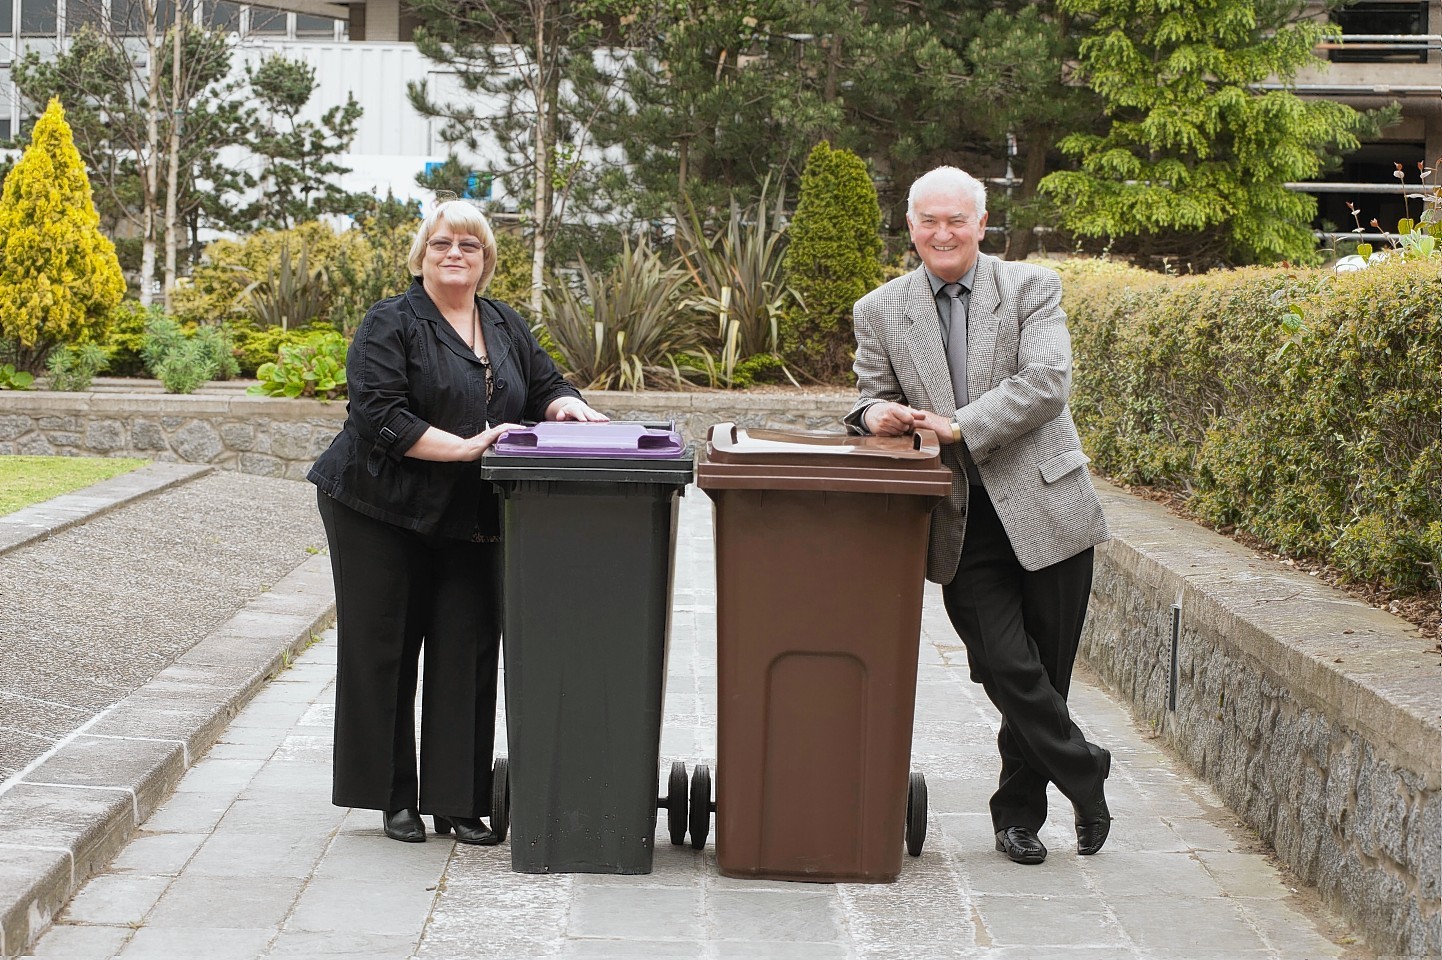 Officials are to visit the day before rubbish is due for collection to offer green advice